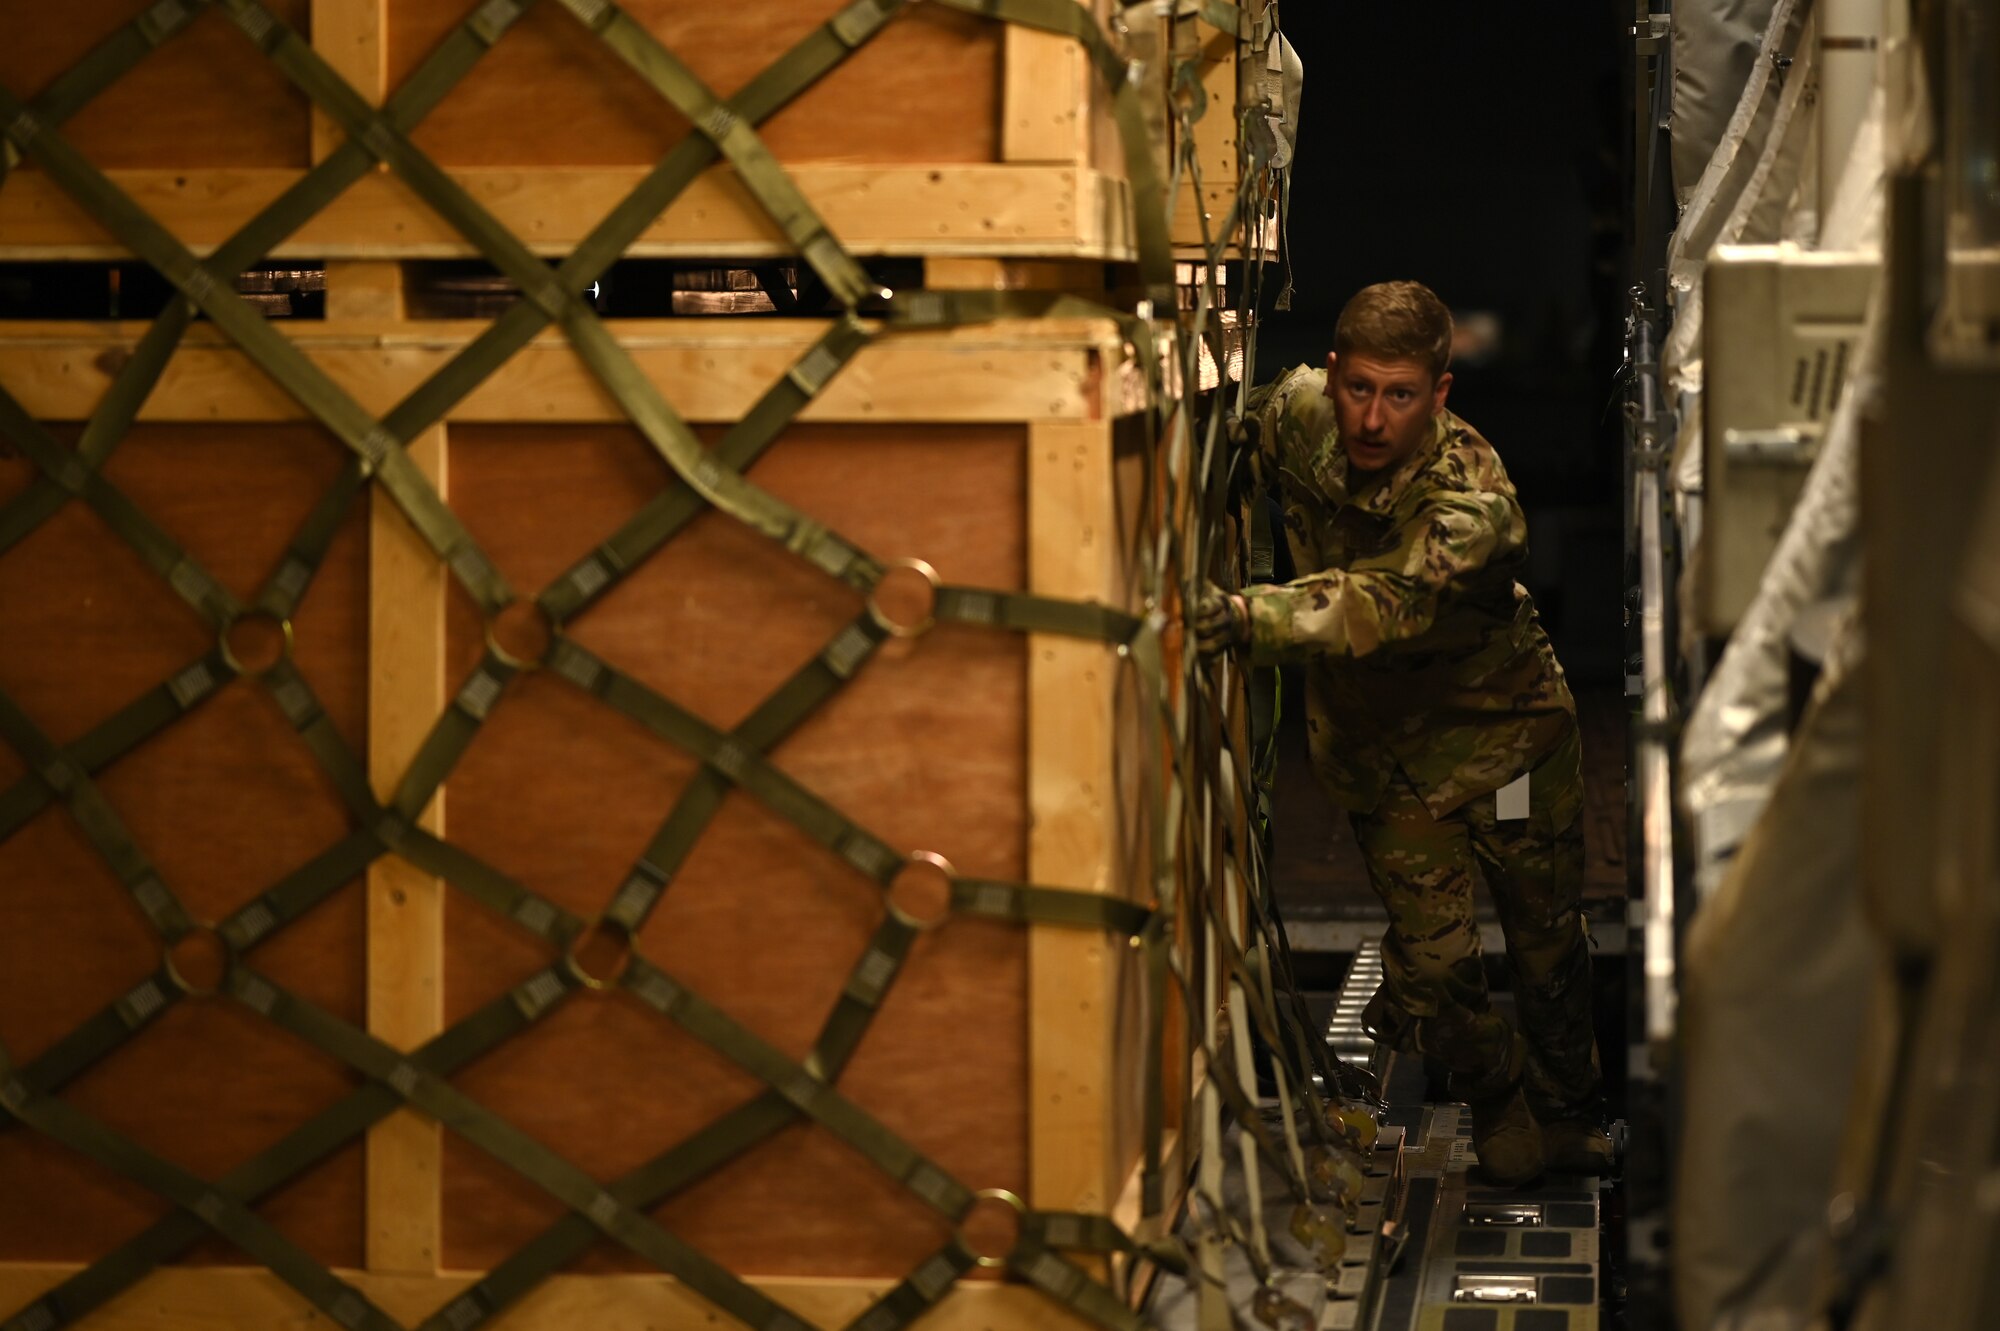 Staff Sgt. Nicholas Hartley, 8th Expeditionary Airlift Squadron loadmaster, loads humanitarian aid supplies onto a C-17 Globemaster III to provide international aid to Türkiye in the U.S. Central Command area of responsibility, Feb. 21, 2023.
The 8th EAS personnel airlifted more than 300,000 pounds of aid, providing humanitarian assistance in response to the devastating impacts in Türkiye following the worst earthquake to hit the region in almost a century. (U.S. Air Force photo by Staff Sgt. Gerald R. Willis)